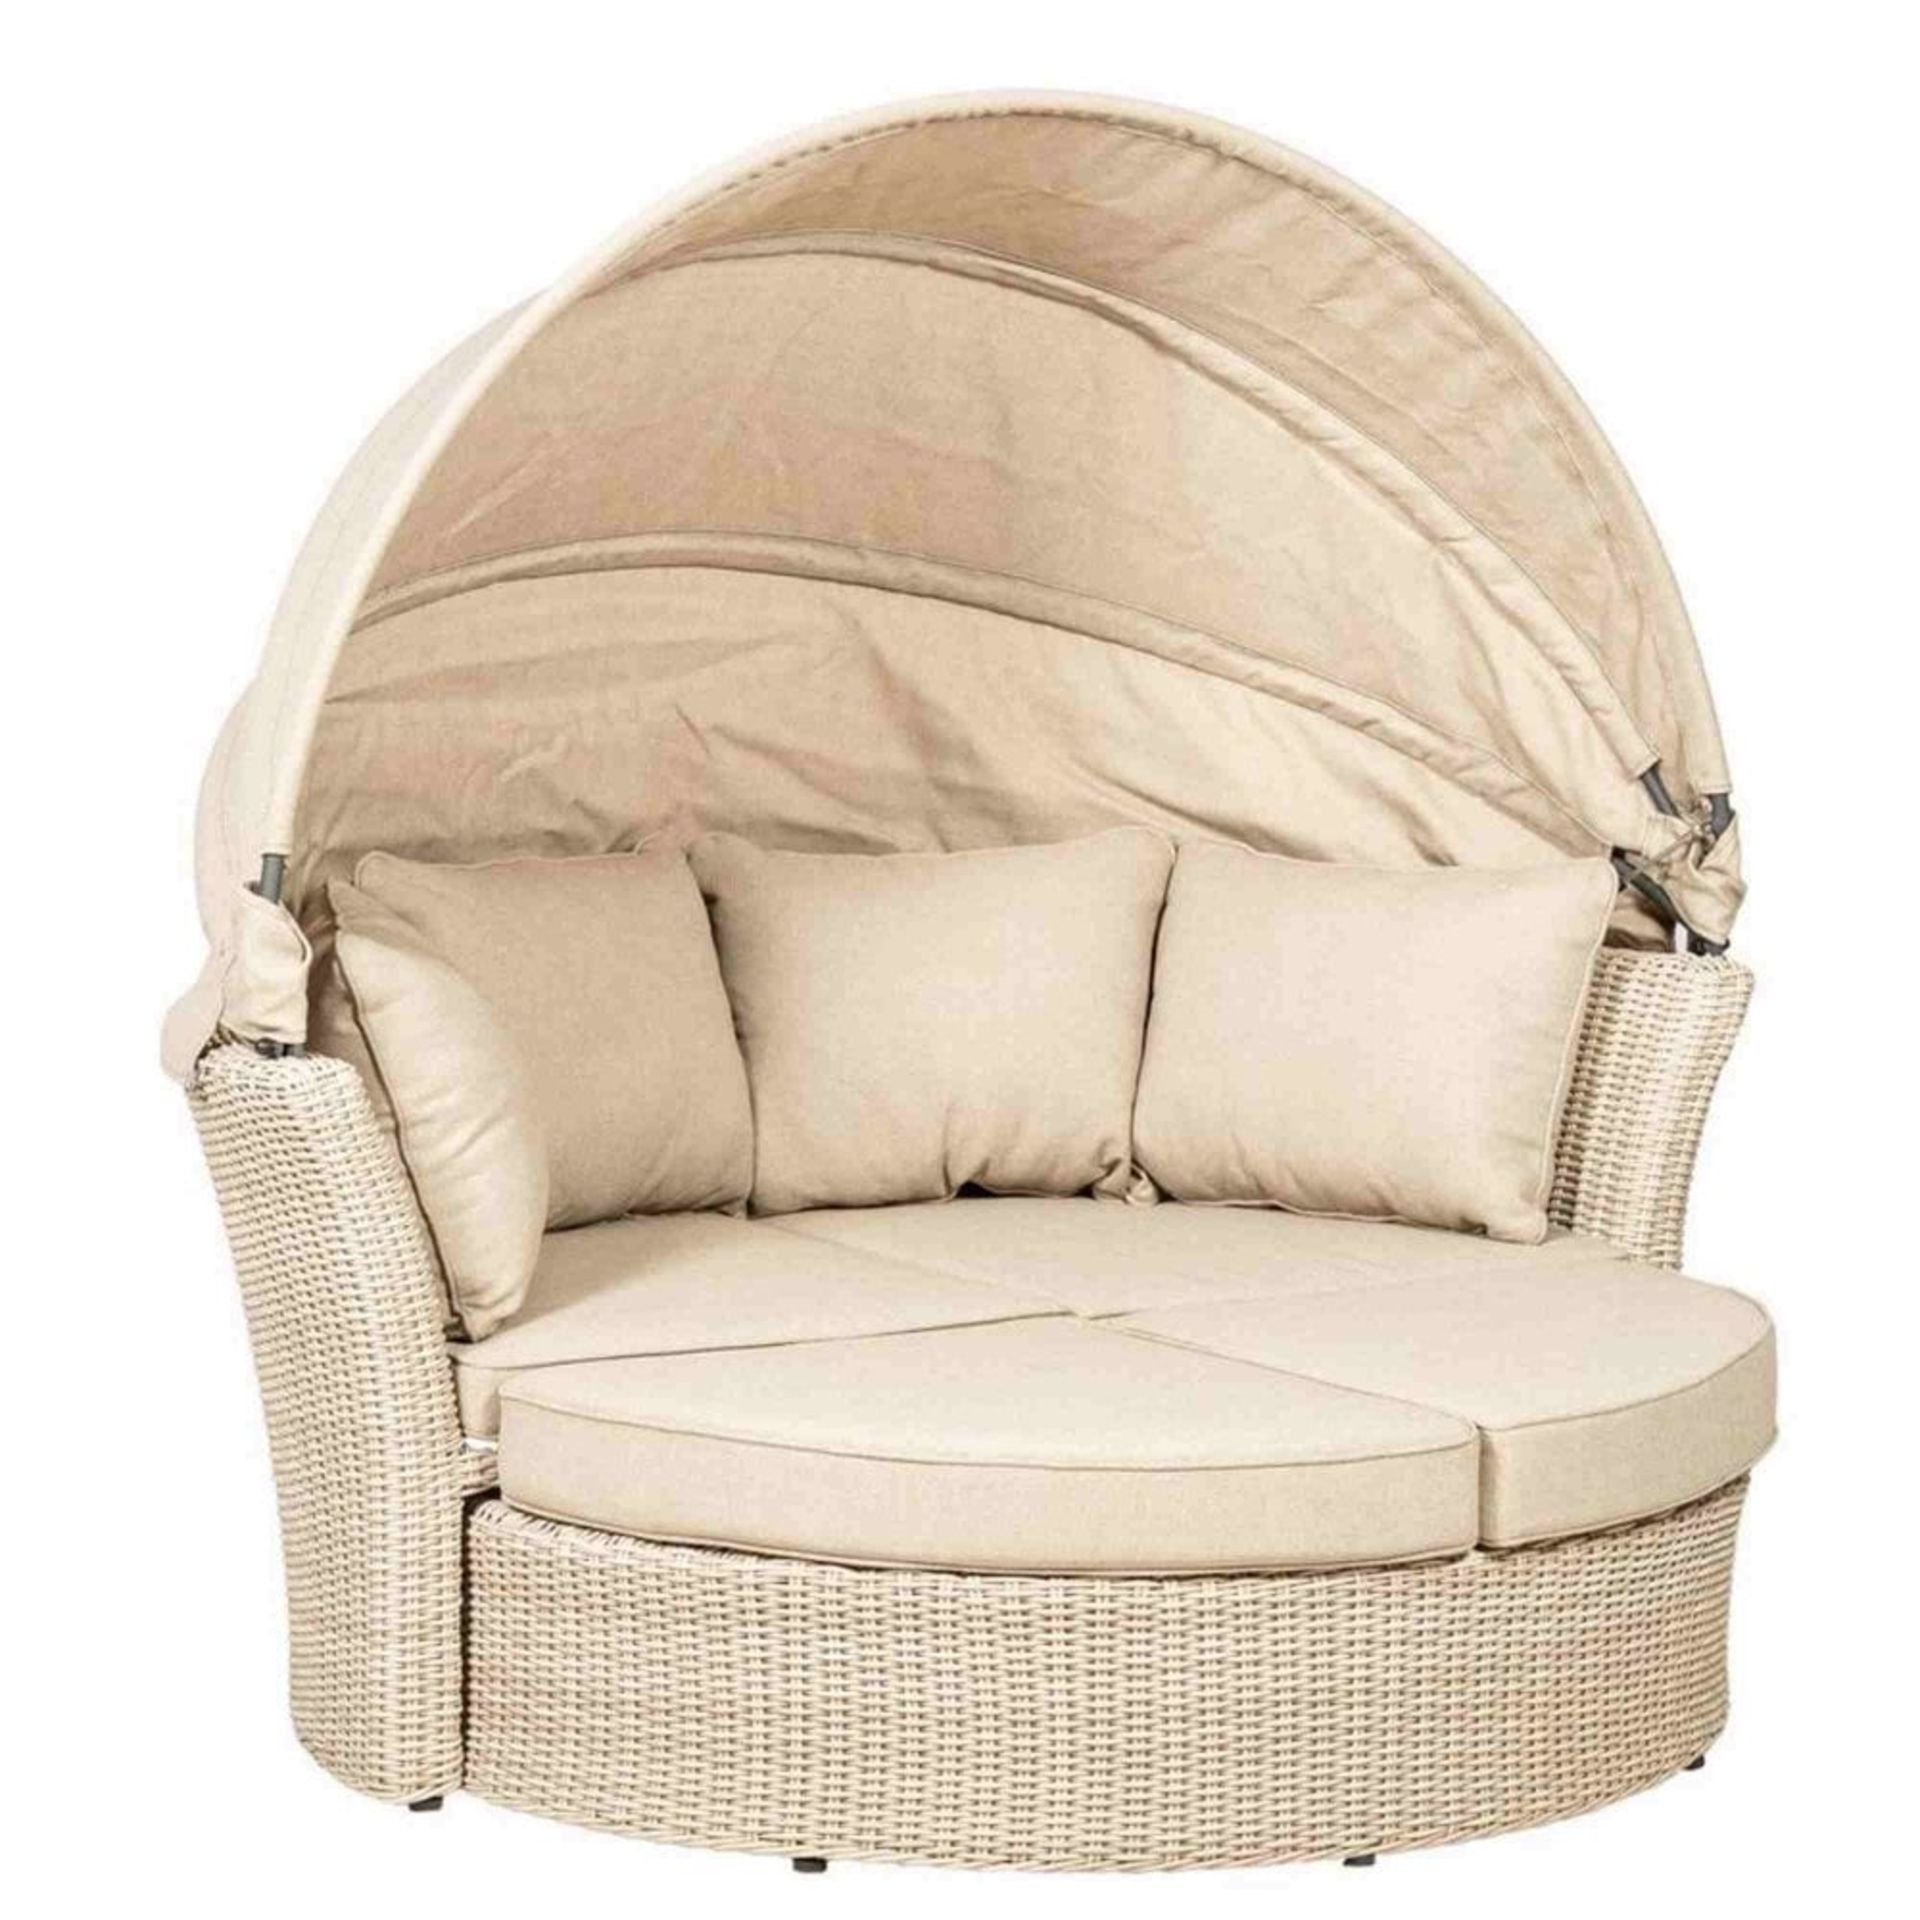 V Brand New Luxury Circular Day Bed With Retractable "Half Moon" Canopy & Weather Proof All Year